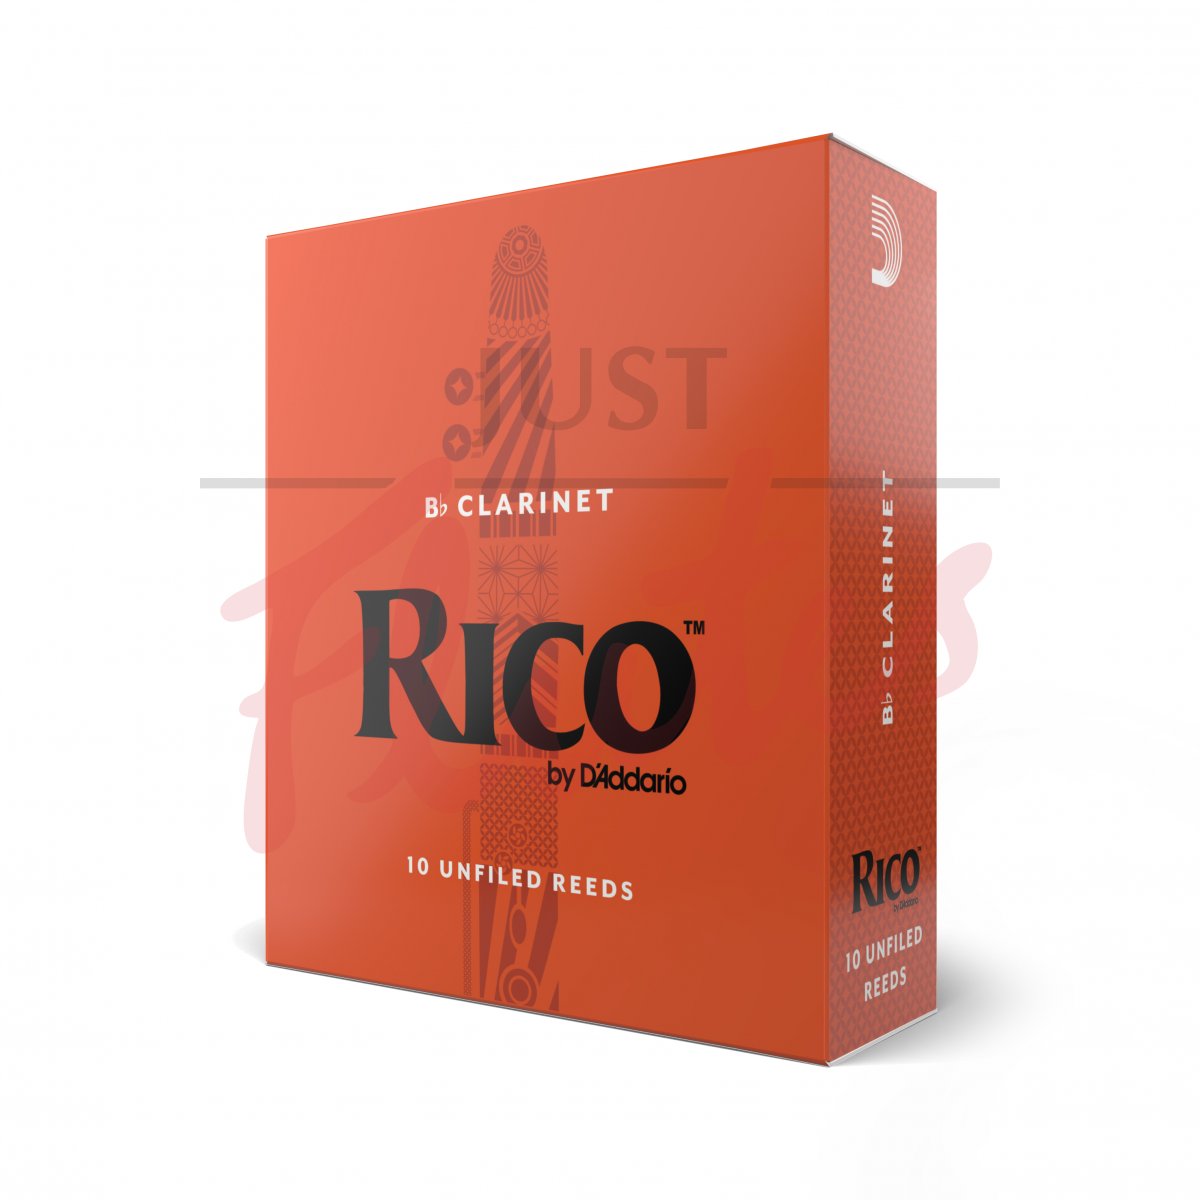 Rico by D'Addario RCA1020 Clarinet Reeds, 10-pack - Strength 2